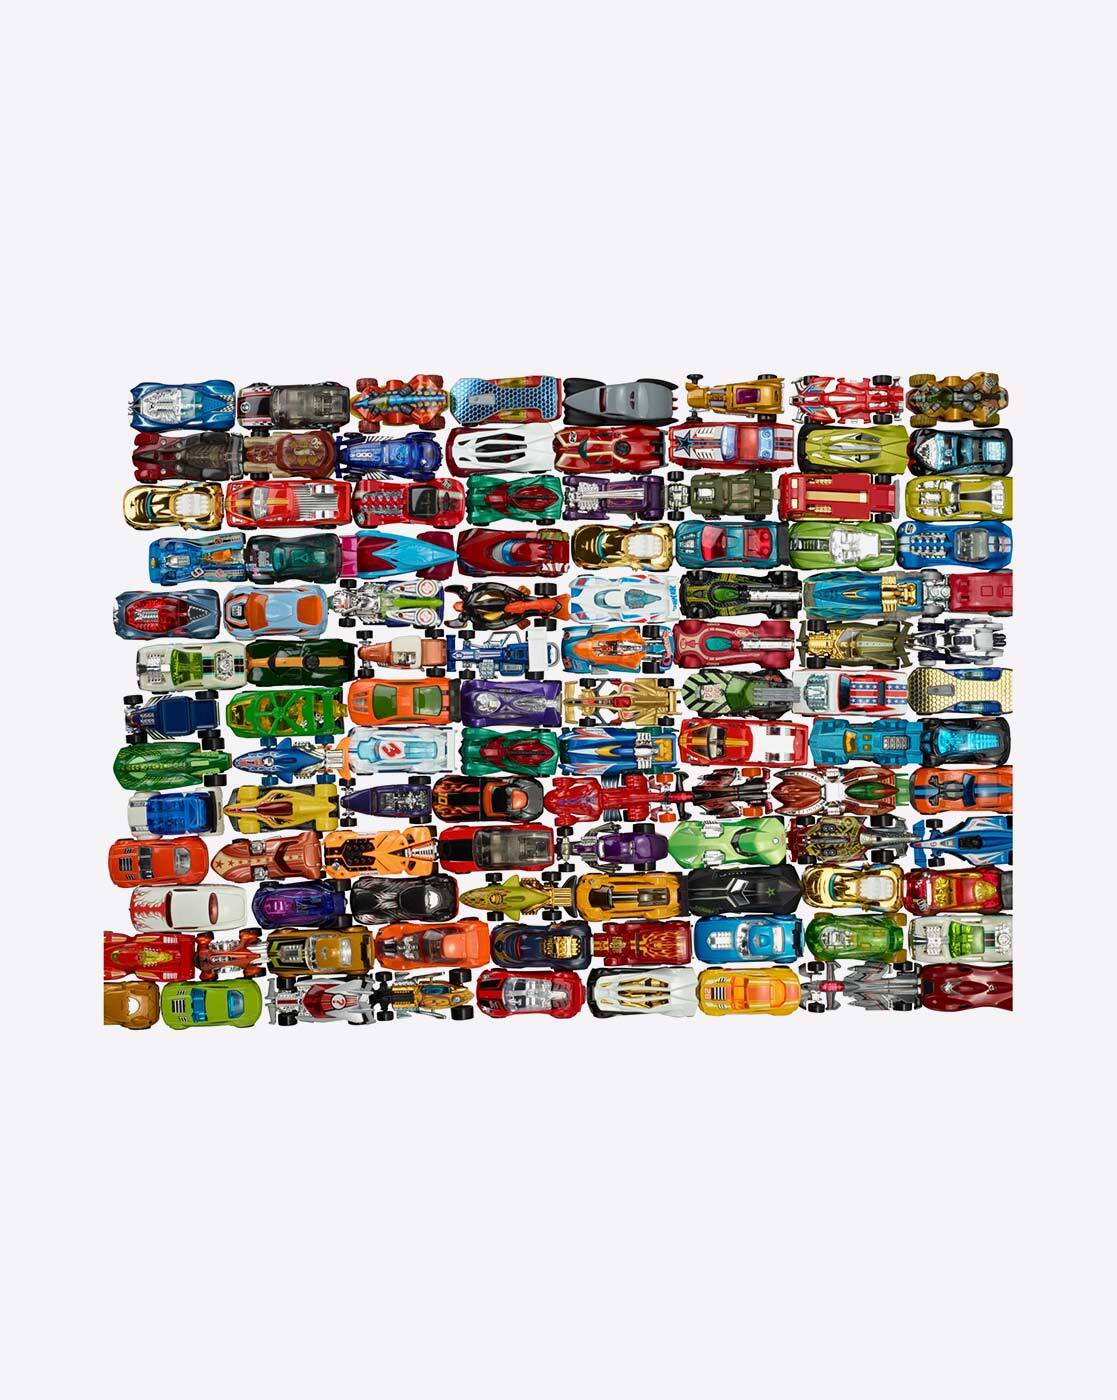 Buy Hot Wheels Basic Car Assortment, Colors and Design May Vary Online at  Best Price in India – FunCorp India